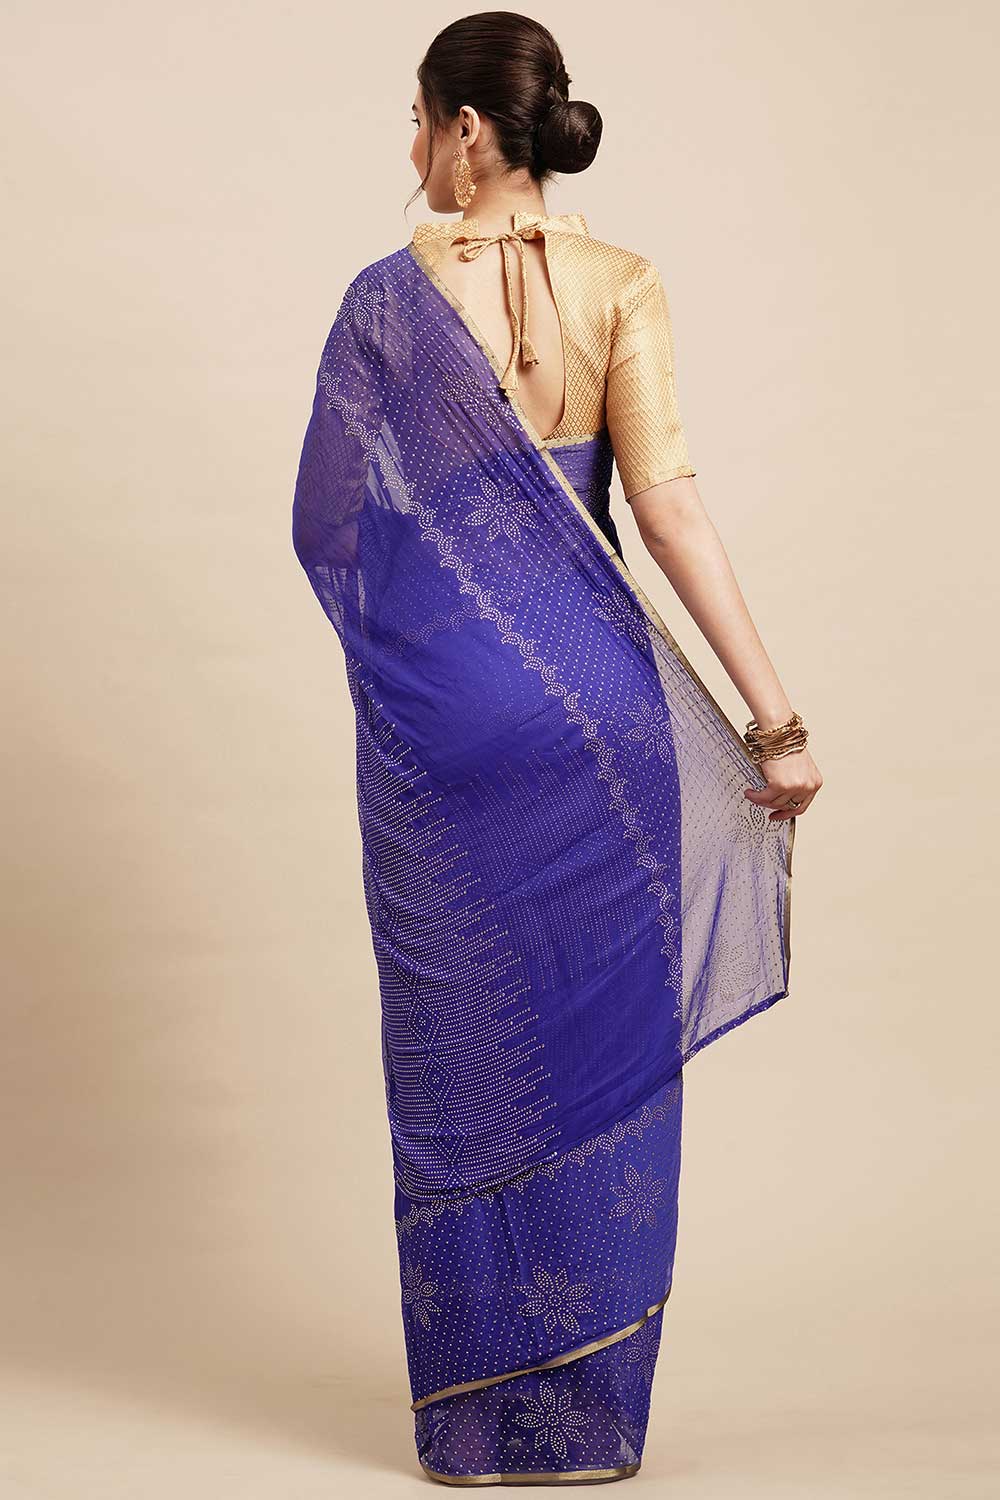 Shop Lorie Blue Chiffon Floral Embellished One Minute Saree at best offer at our  Store - One Minute Saree